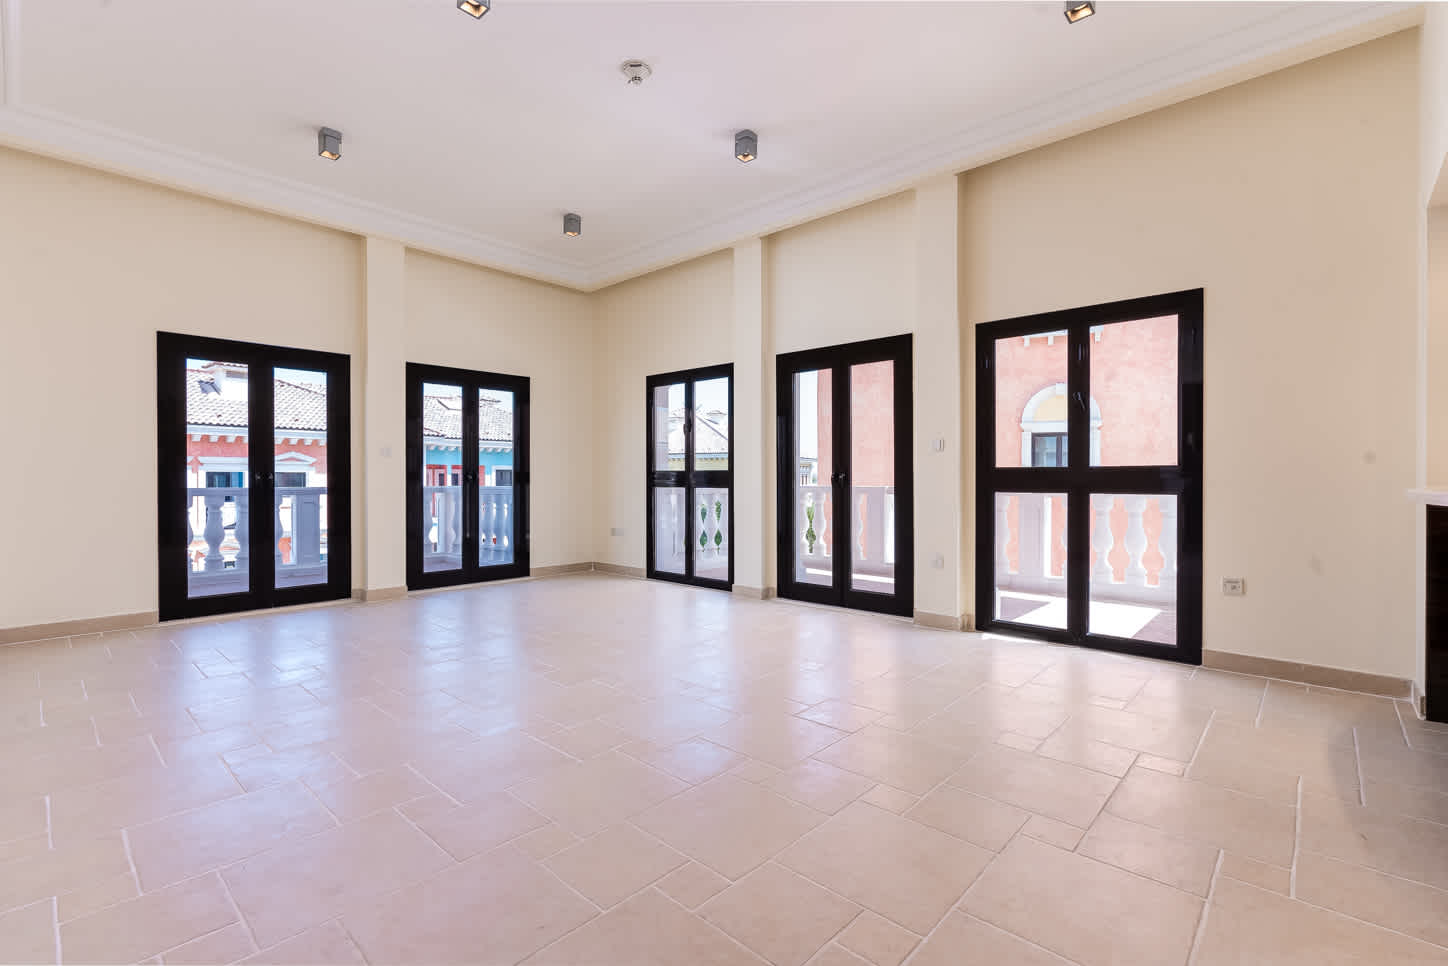 25 Spaces Real Estate - Qanat quartier - Properties for Sale - 17 May 2022 (ref APT25220)4